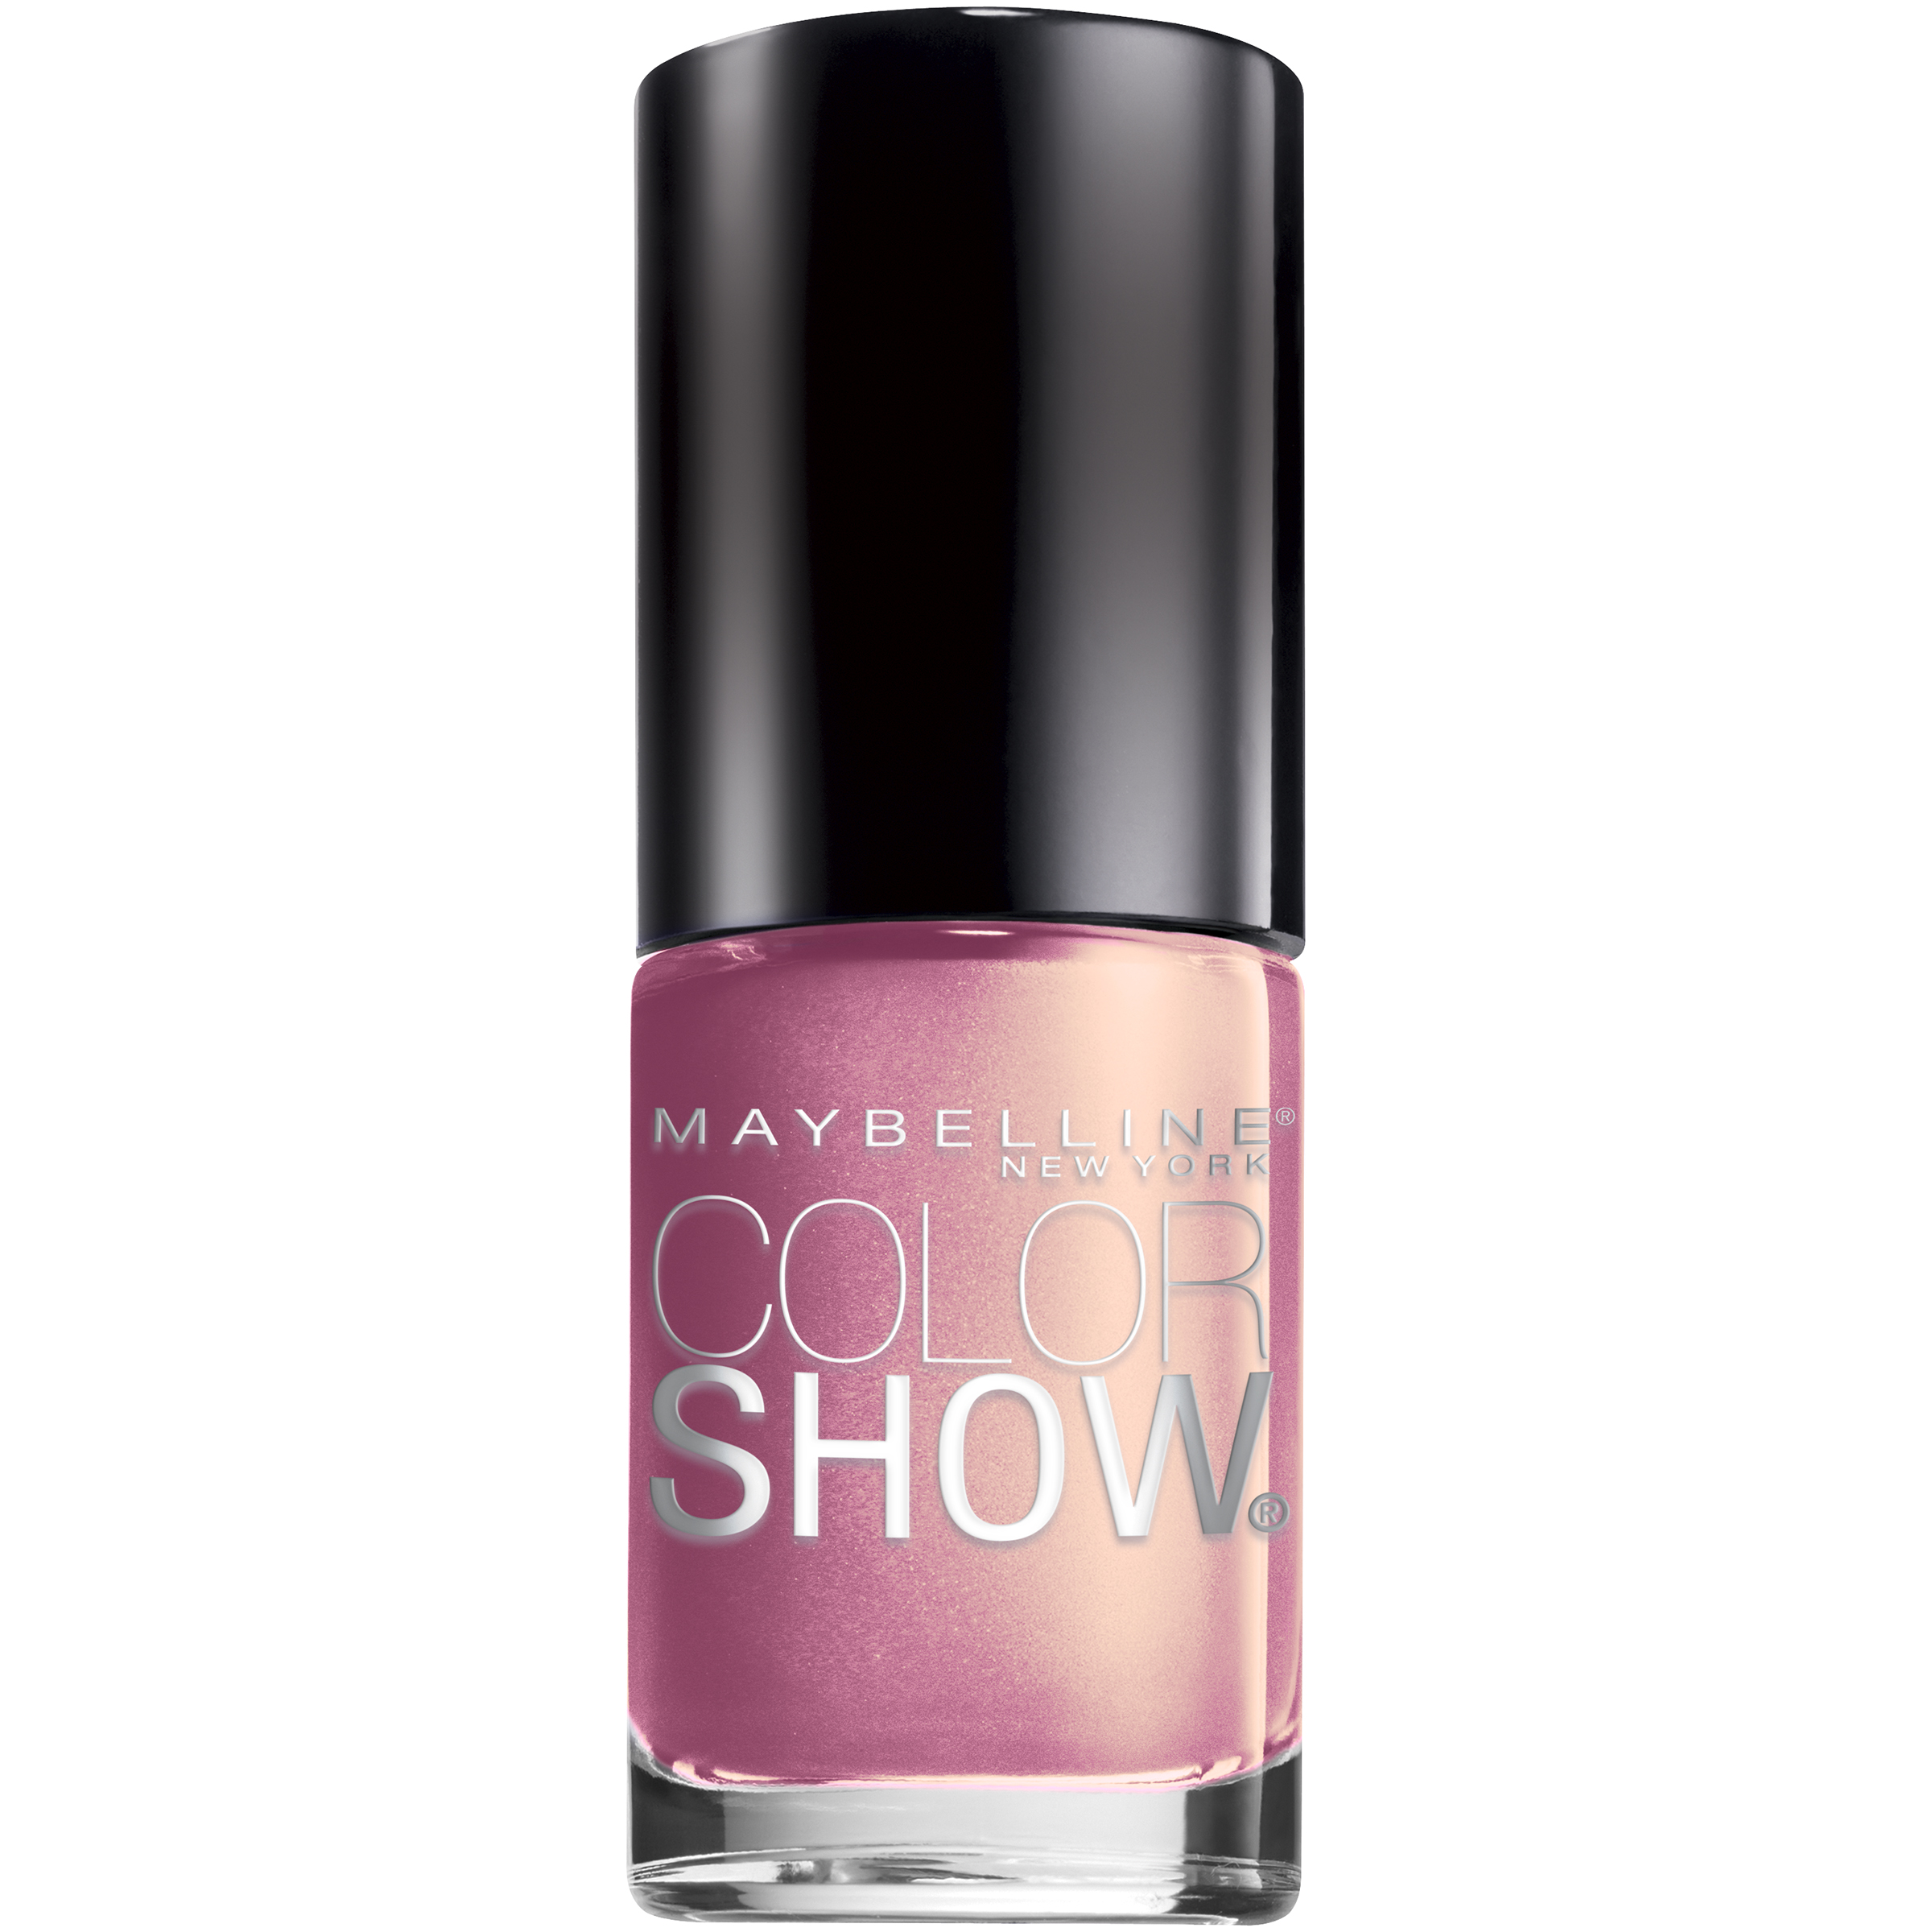 Maybelline New York Nail Lacquer, Over-Jeweled, 0.23 fl oz